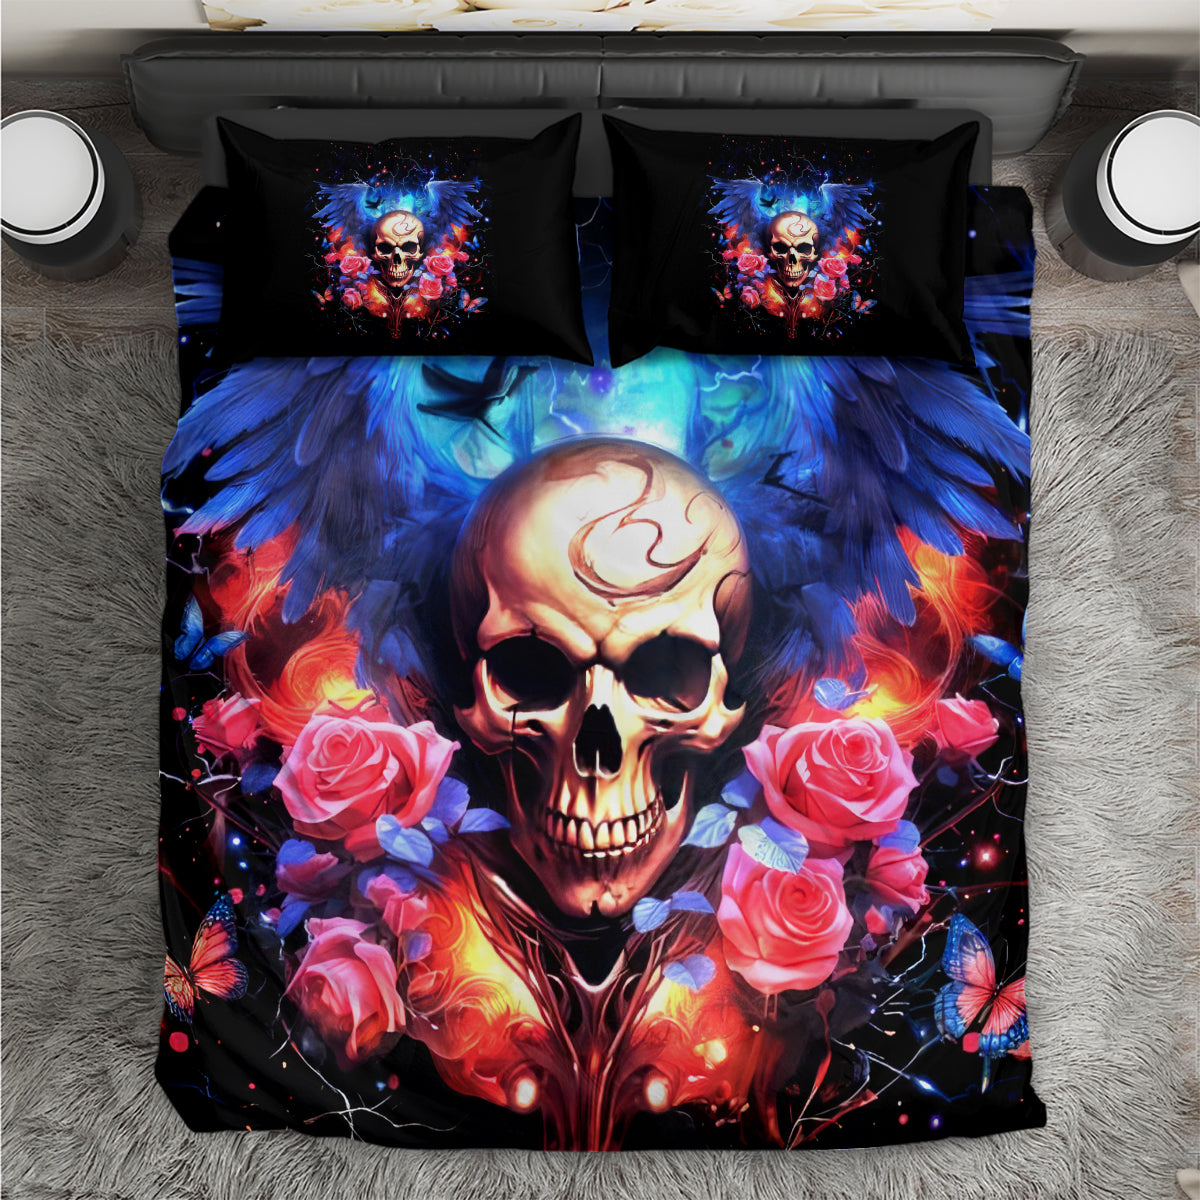 Fairy Skull Bedding Set Assuming I Was Like Most Girls Was Your First Mistake